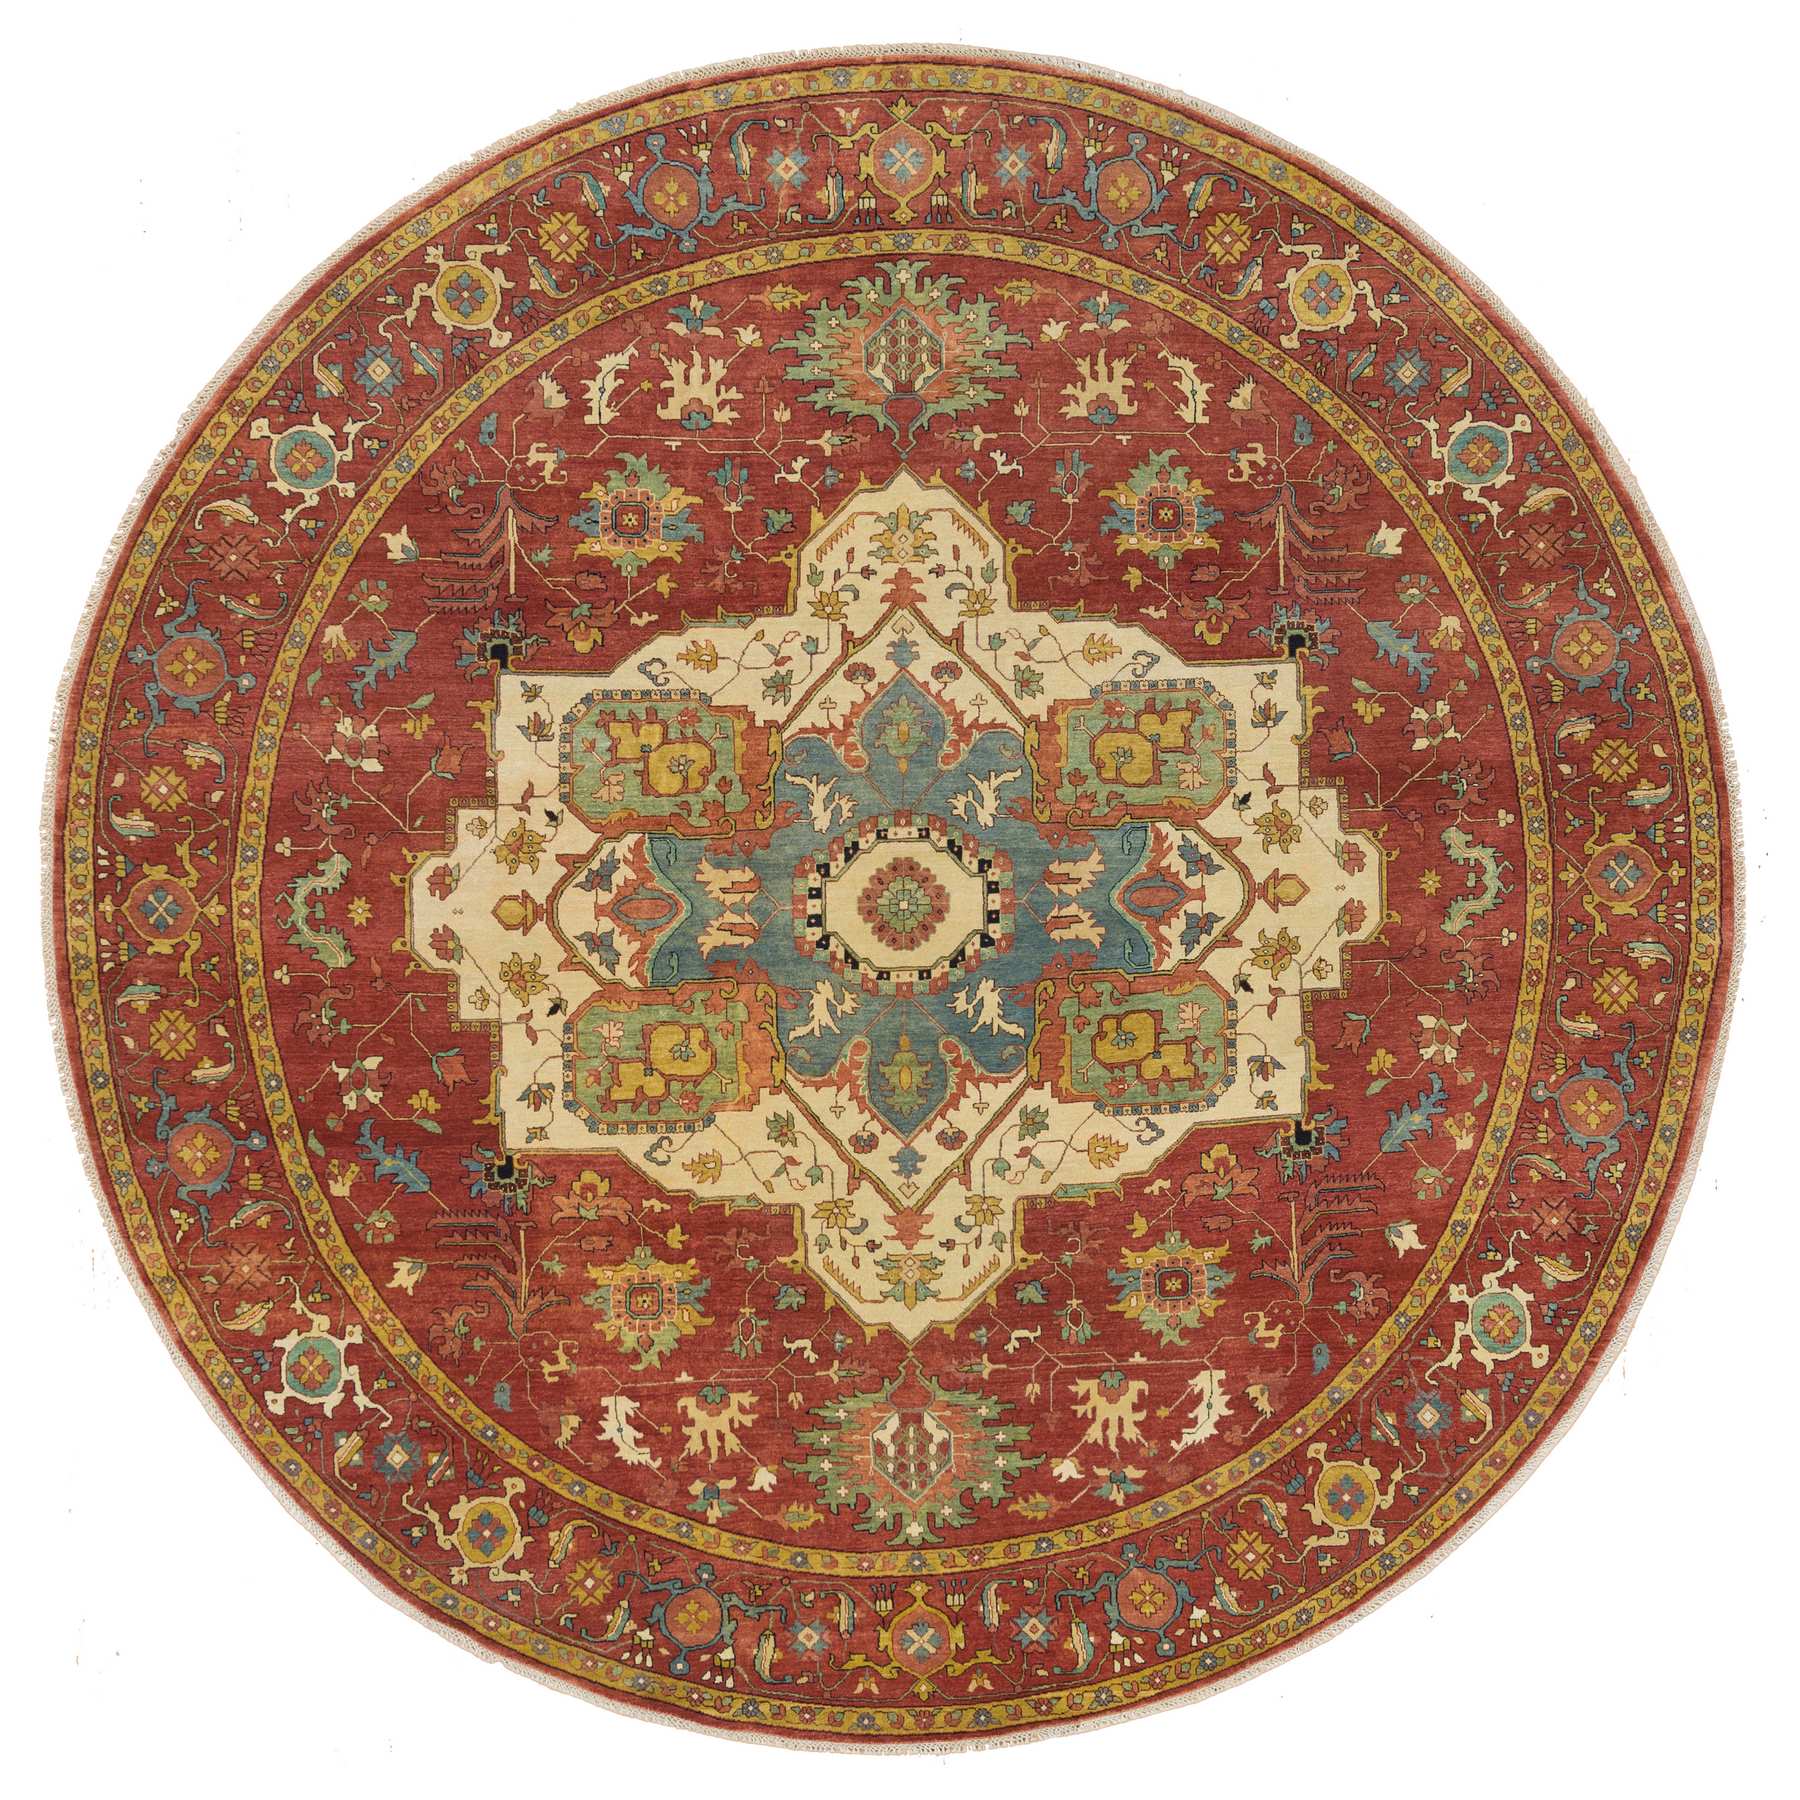  Wool Hand-Knotted Area Rug 11'10